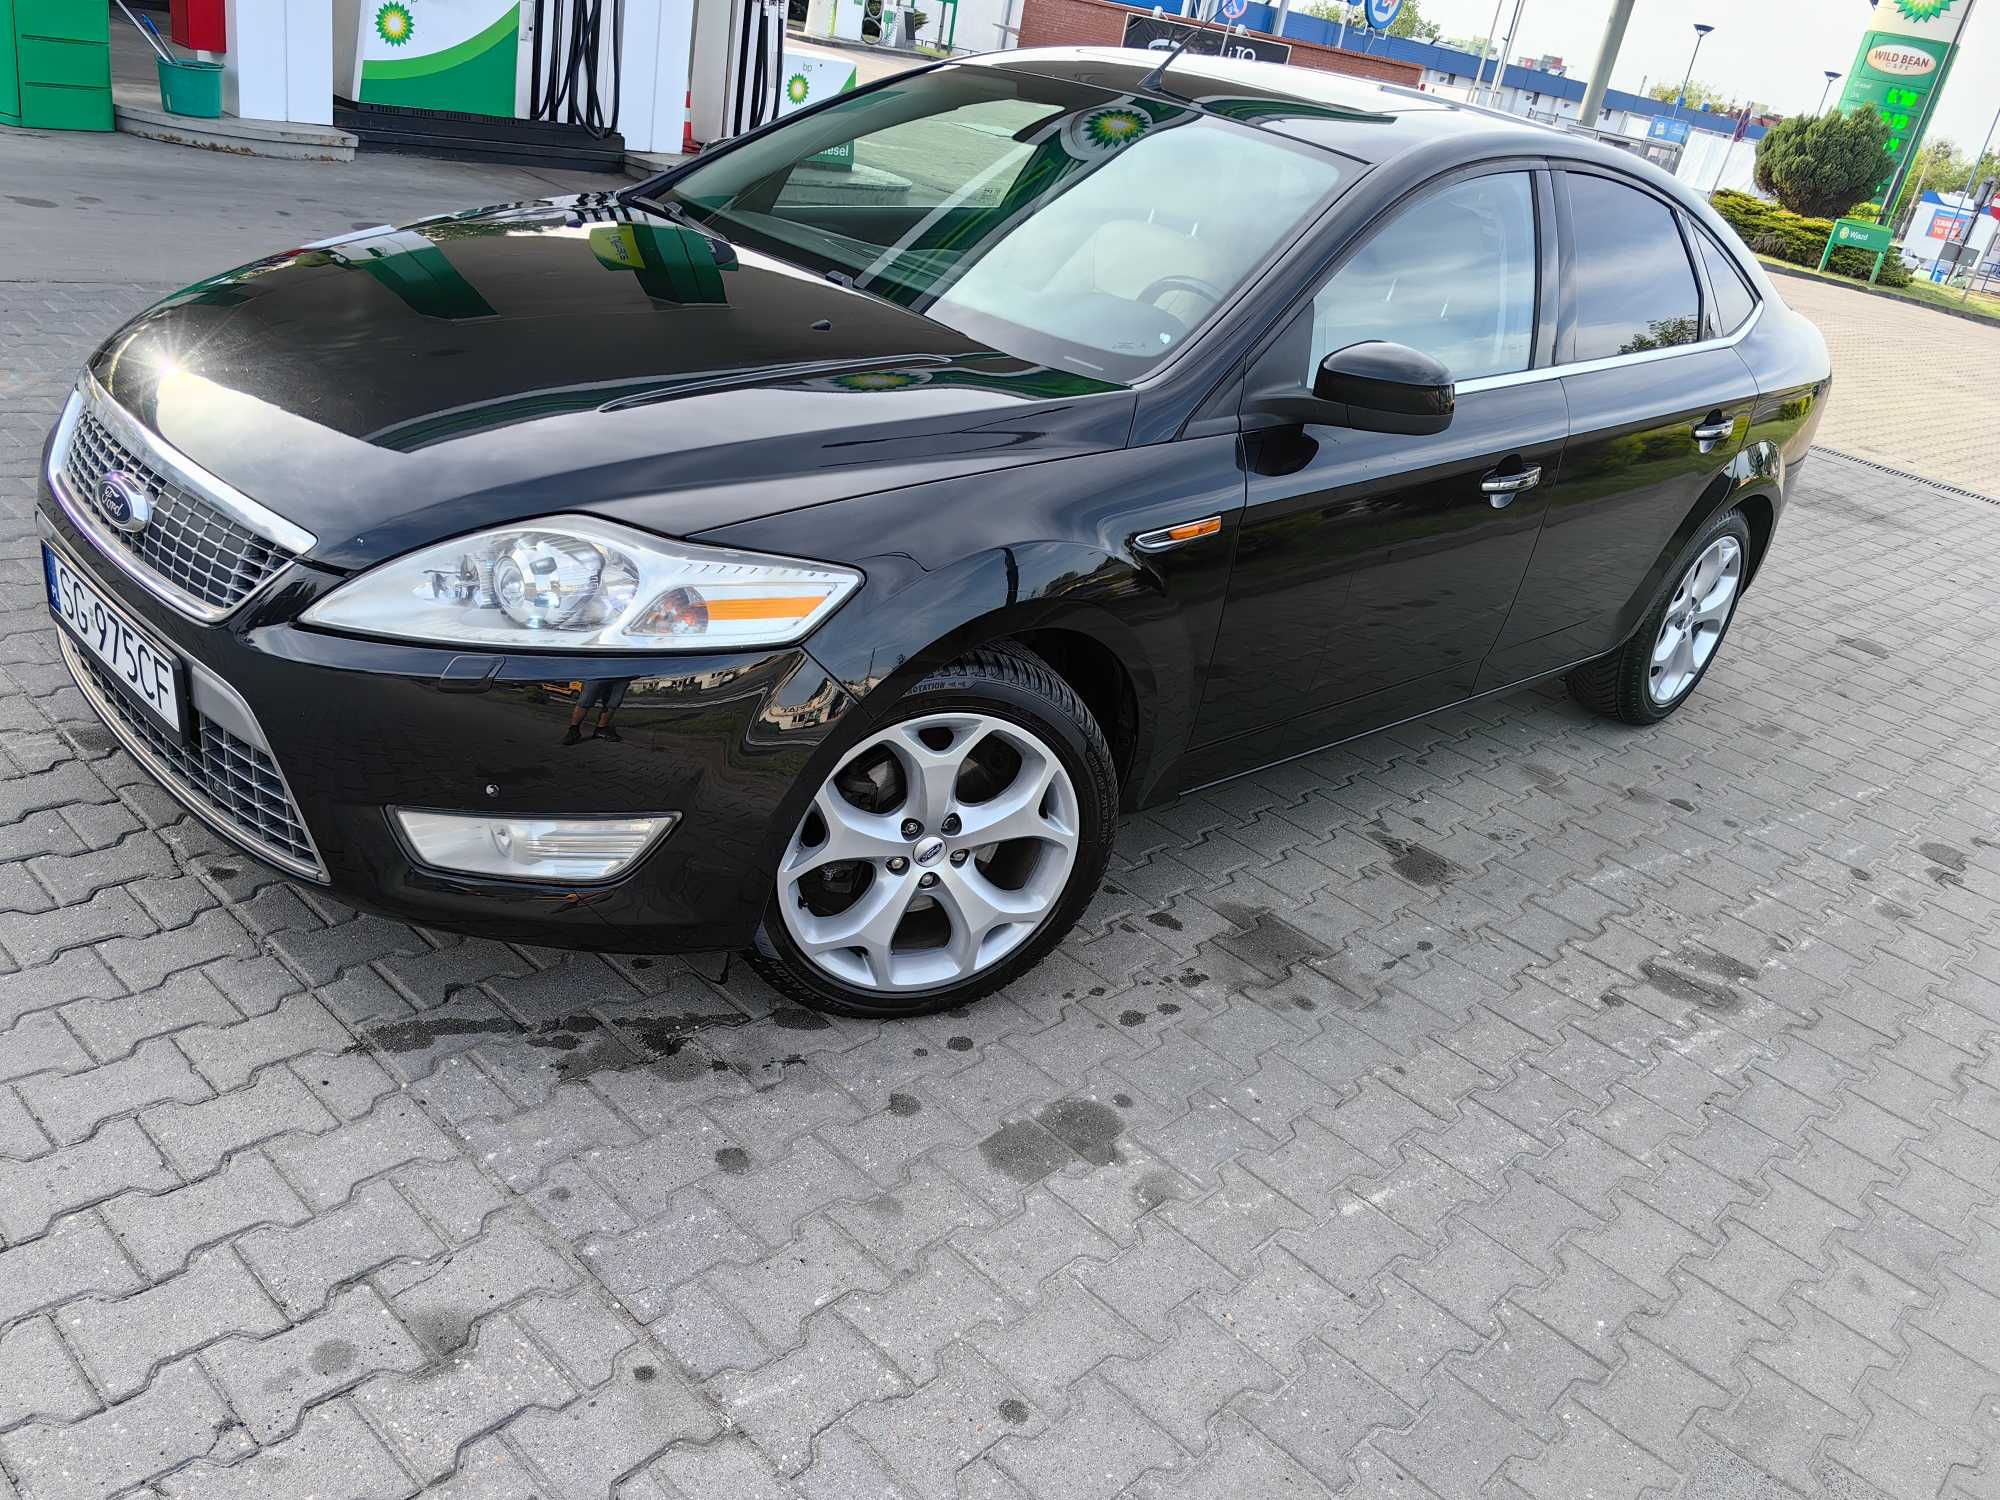 Mondeo Ford 2.0 tdci